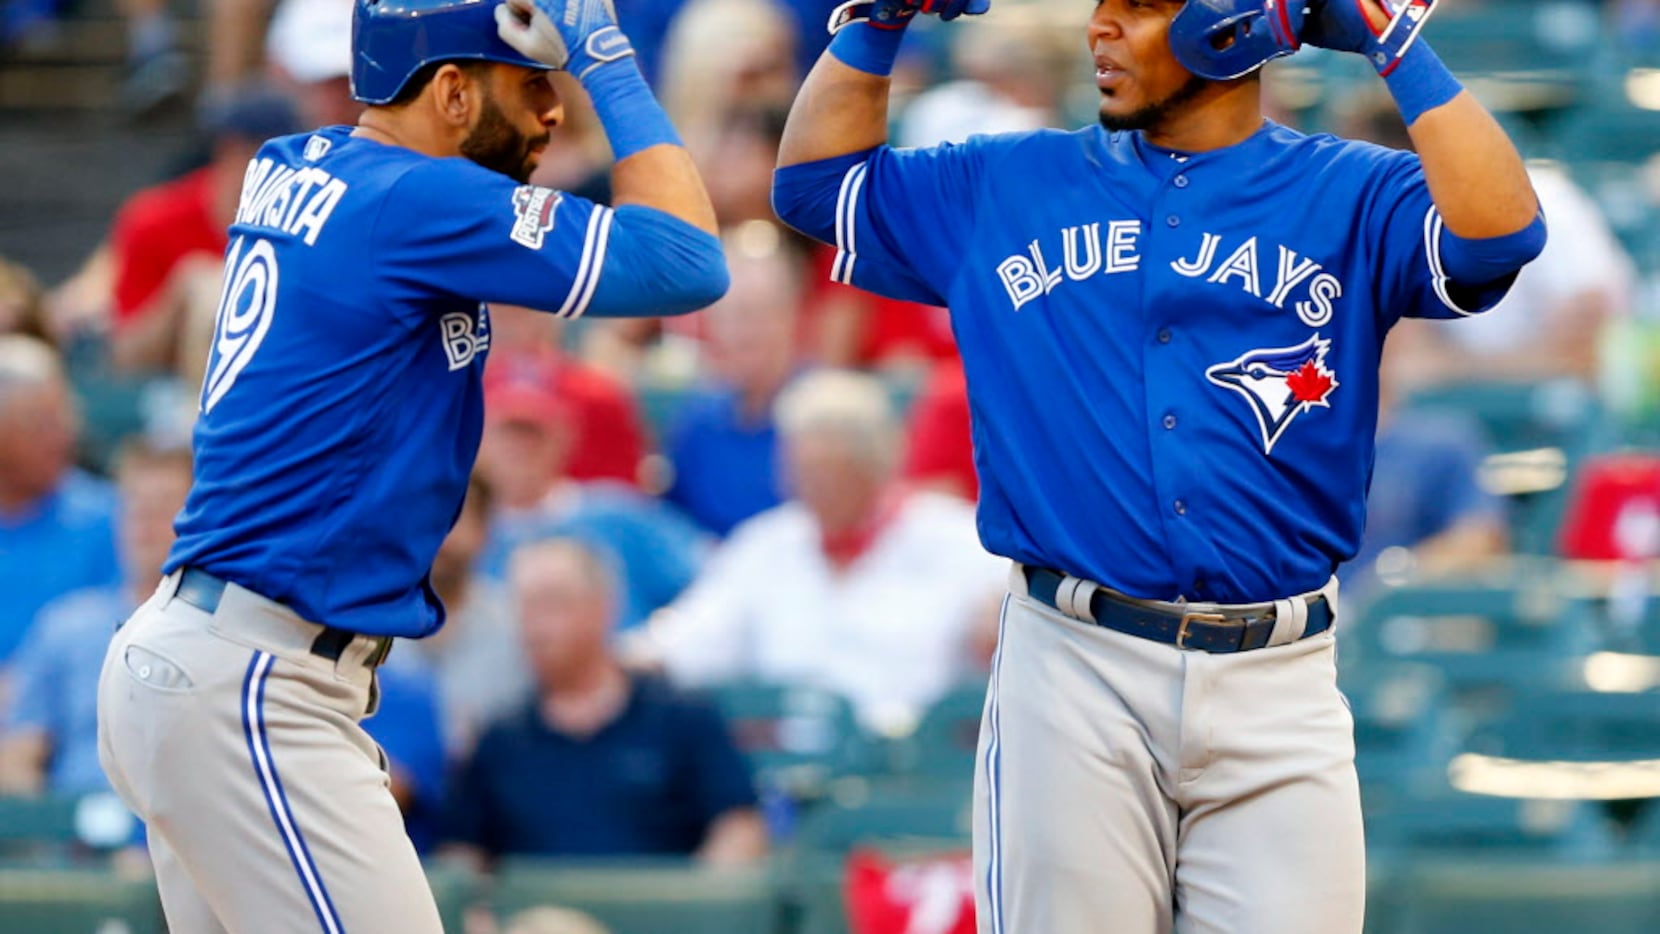 Blue Jays will make a qualifying offer to Jose Bautista and Edwin